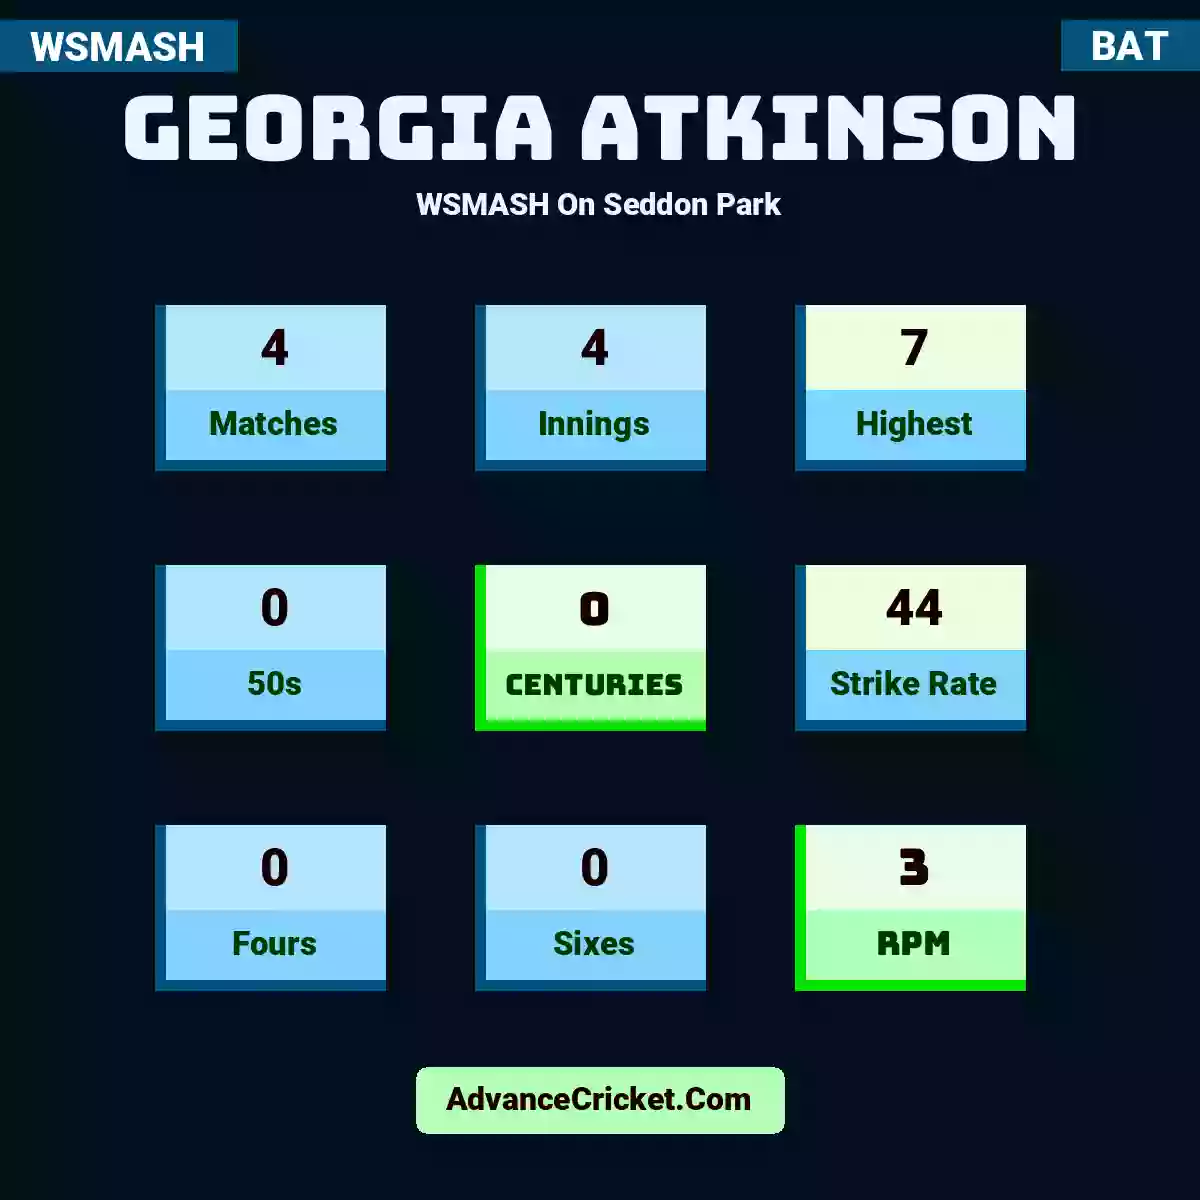 Georgia Atkinson WSMASH  On Seddon Park, Georgia Atkinson played 4 matches, scored 7 runs as highest, 0 half-centuries, and 0 centuries, with a strike rate of 44. G.Atkinson hit 0 fours and 0 sixes, with an RPM of 3.